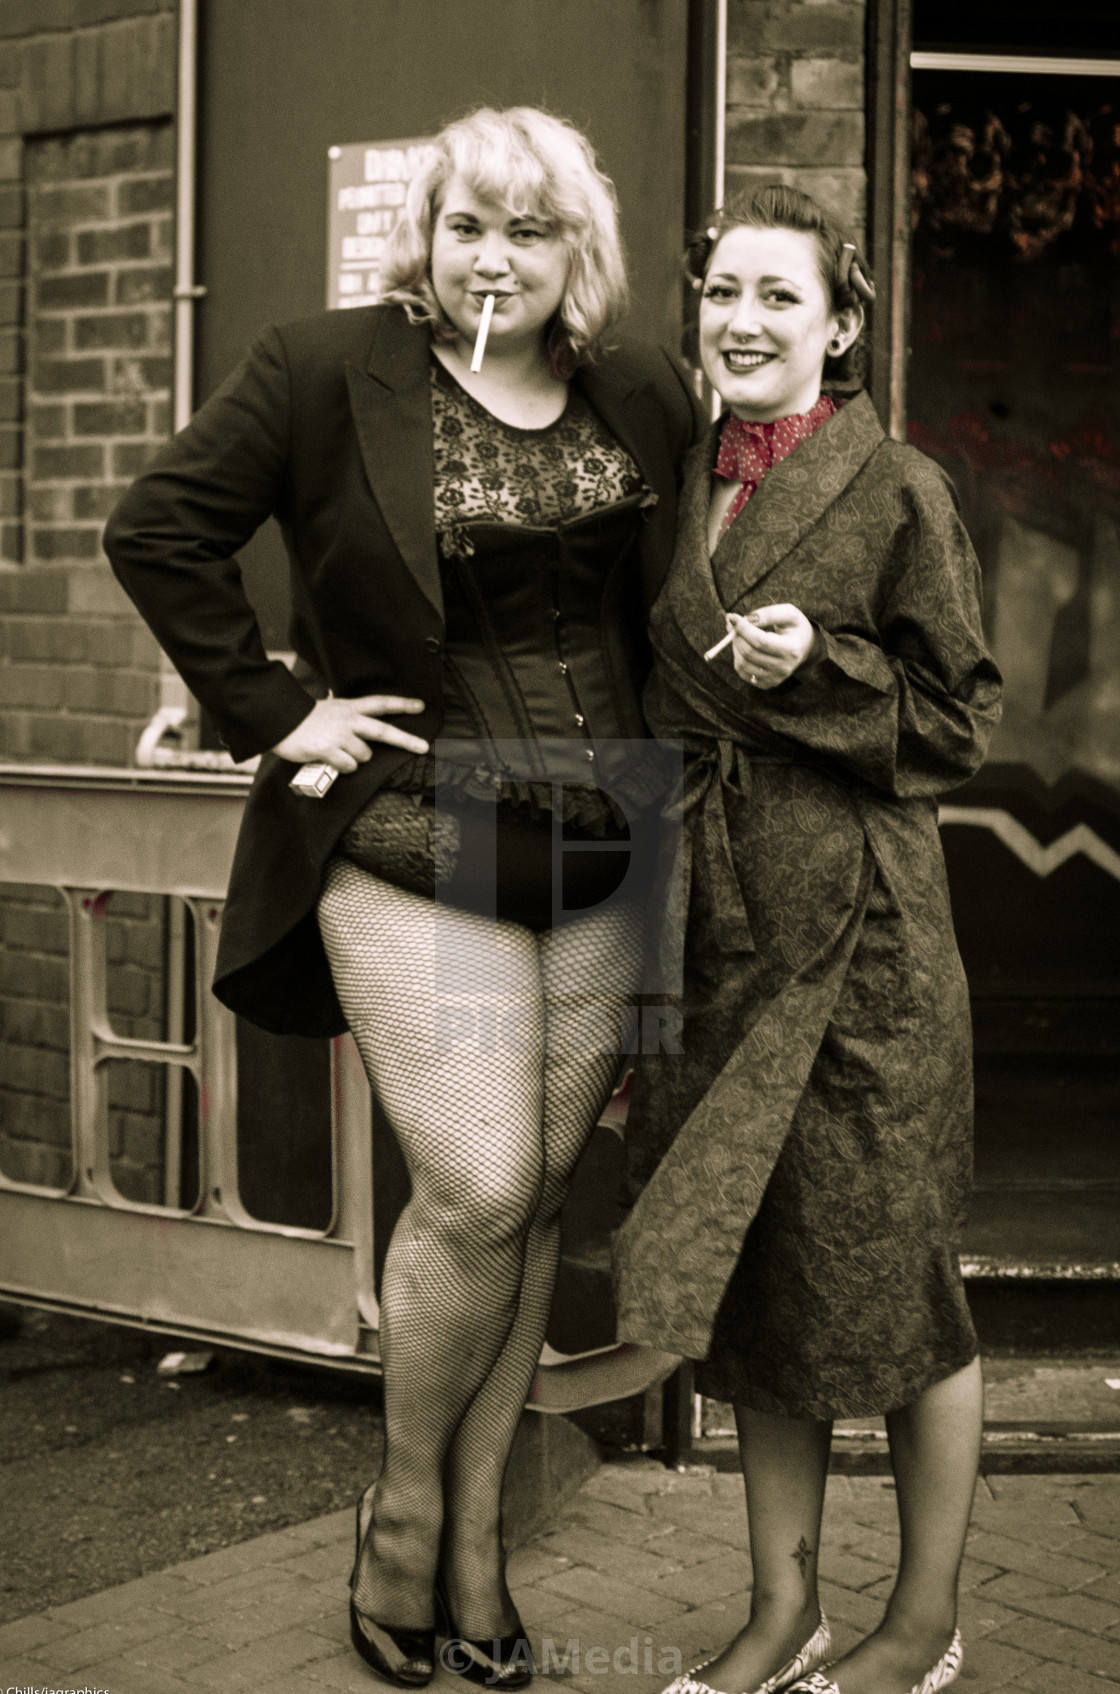 "Burlesque performers taking a break" stock image